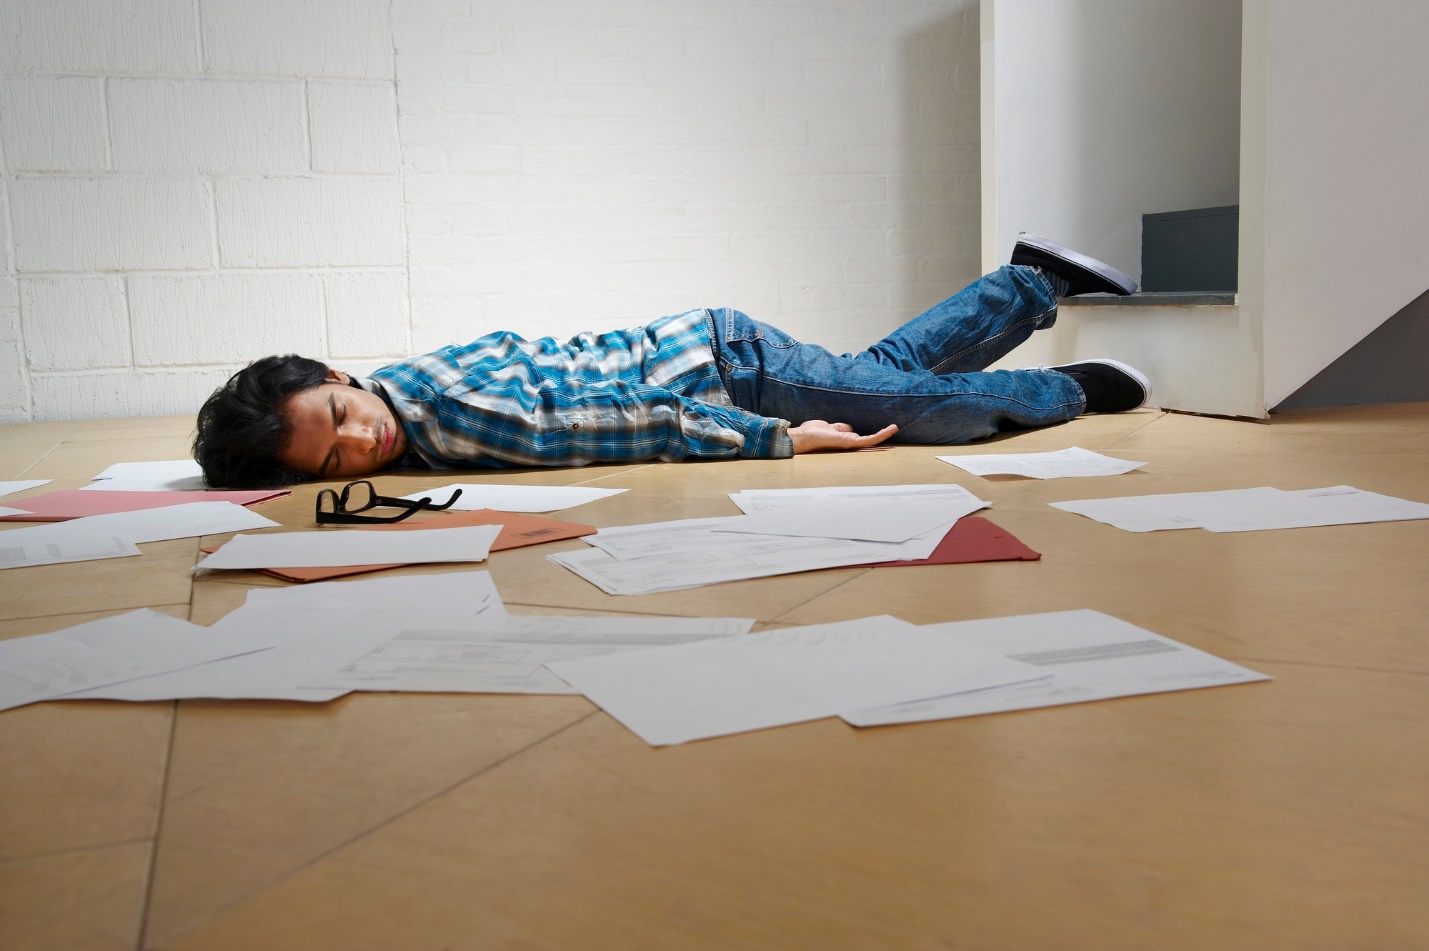 A person lying on the floor with his eyes closed

Description automatically generated